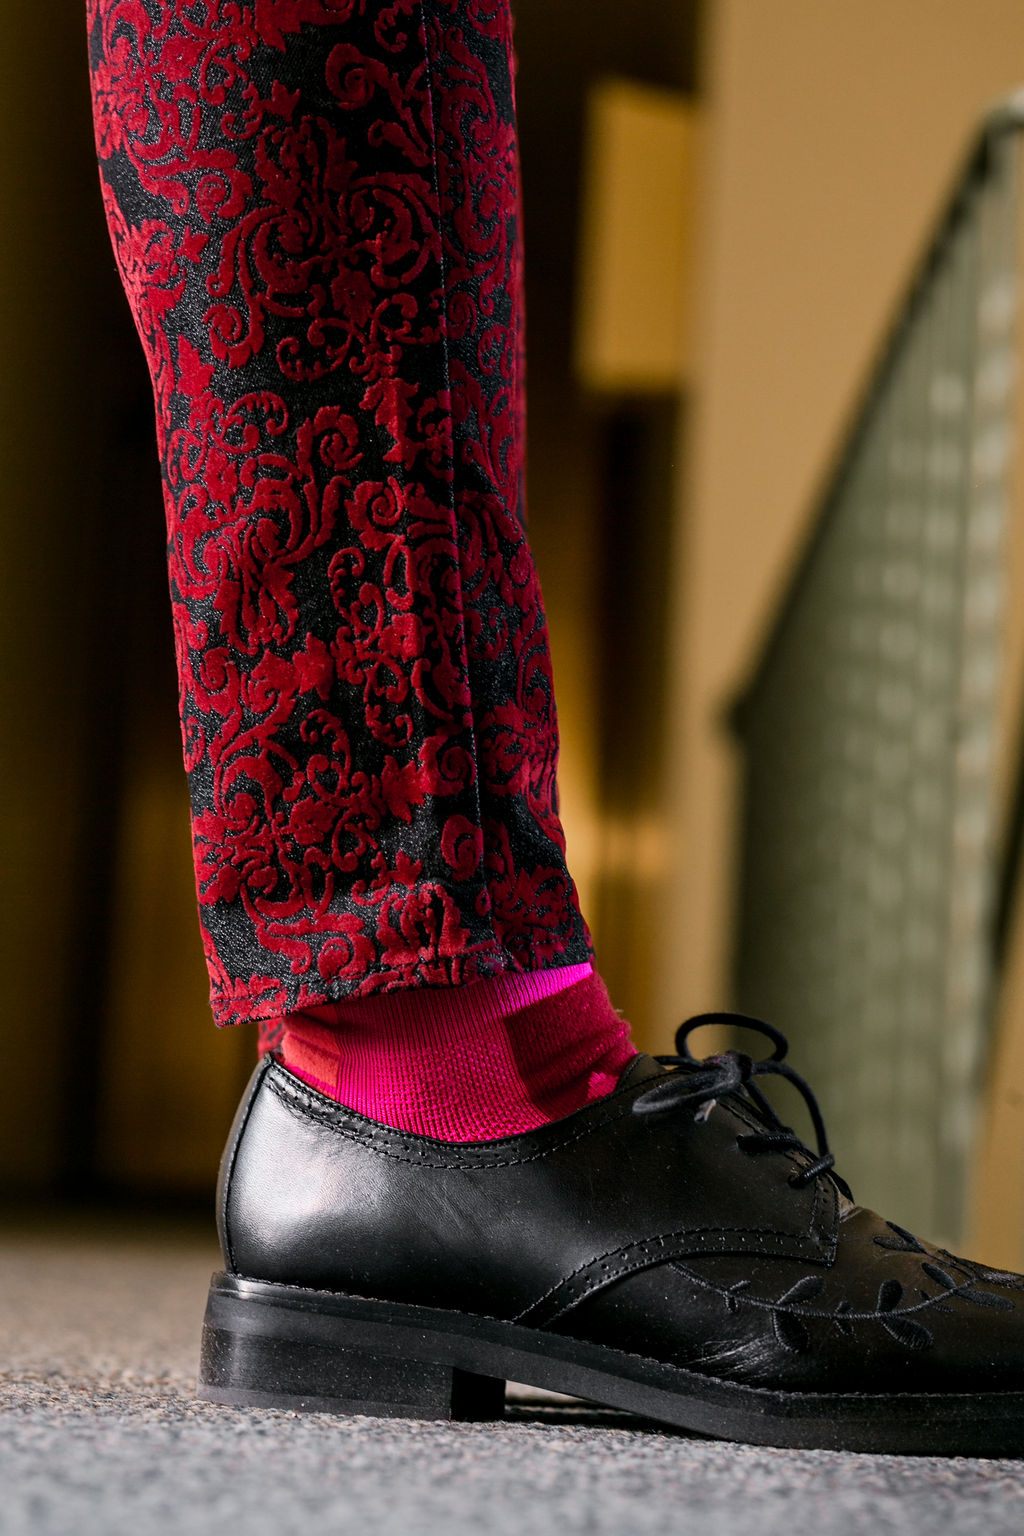 RSEE-LCM-Liveclothesminded-xmmtt-longbeach-2484-christmas outfit idea - red + pink - trend 2019 - dress shoes - pink socks - athletic socks - how to wear fun socks - cool sock